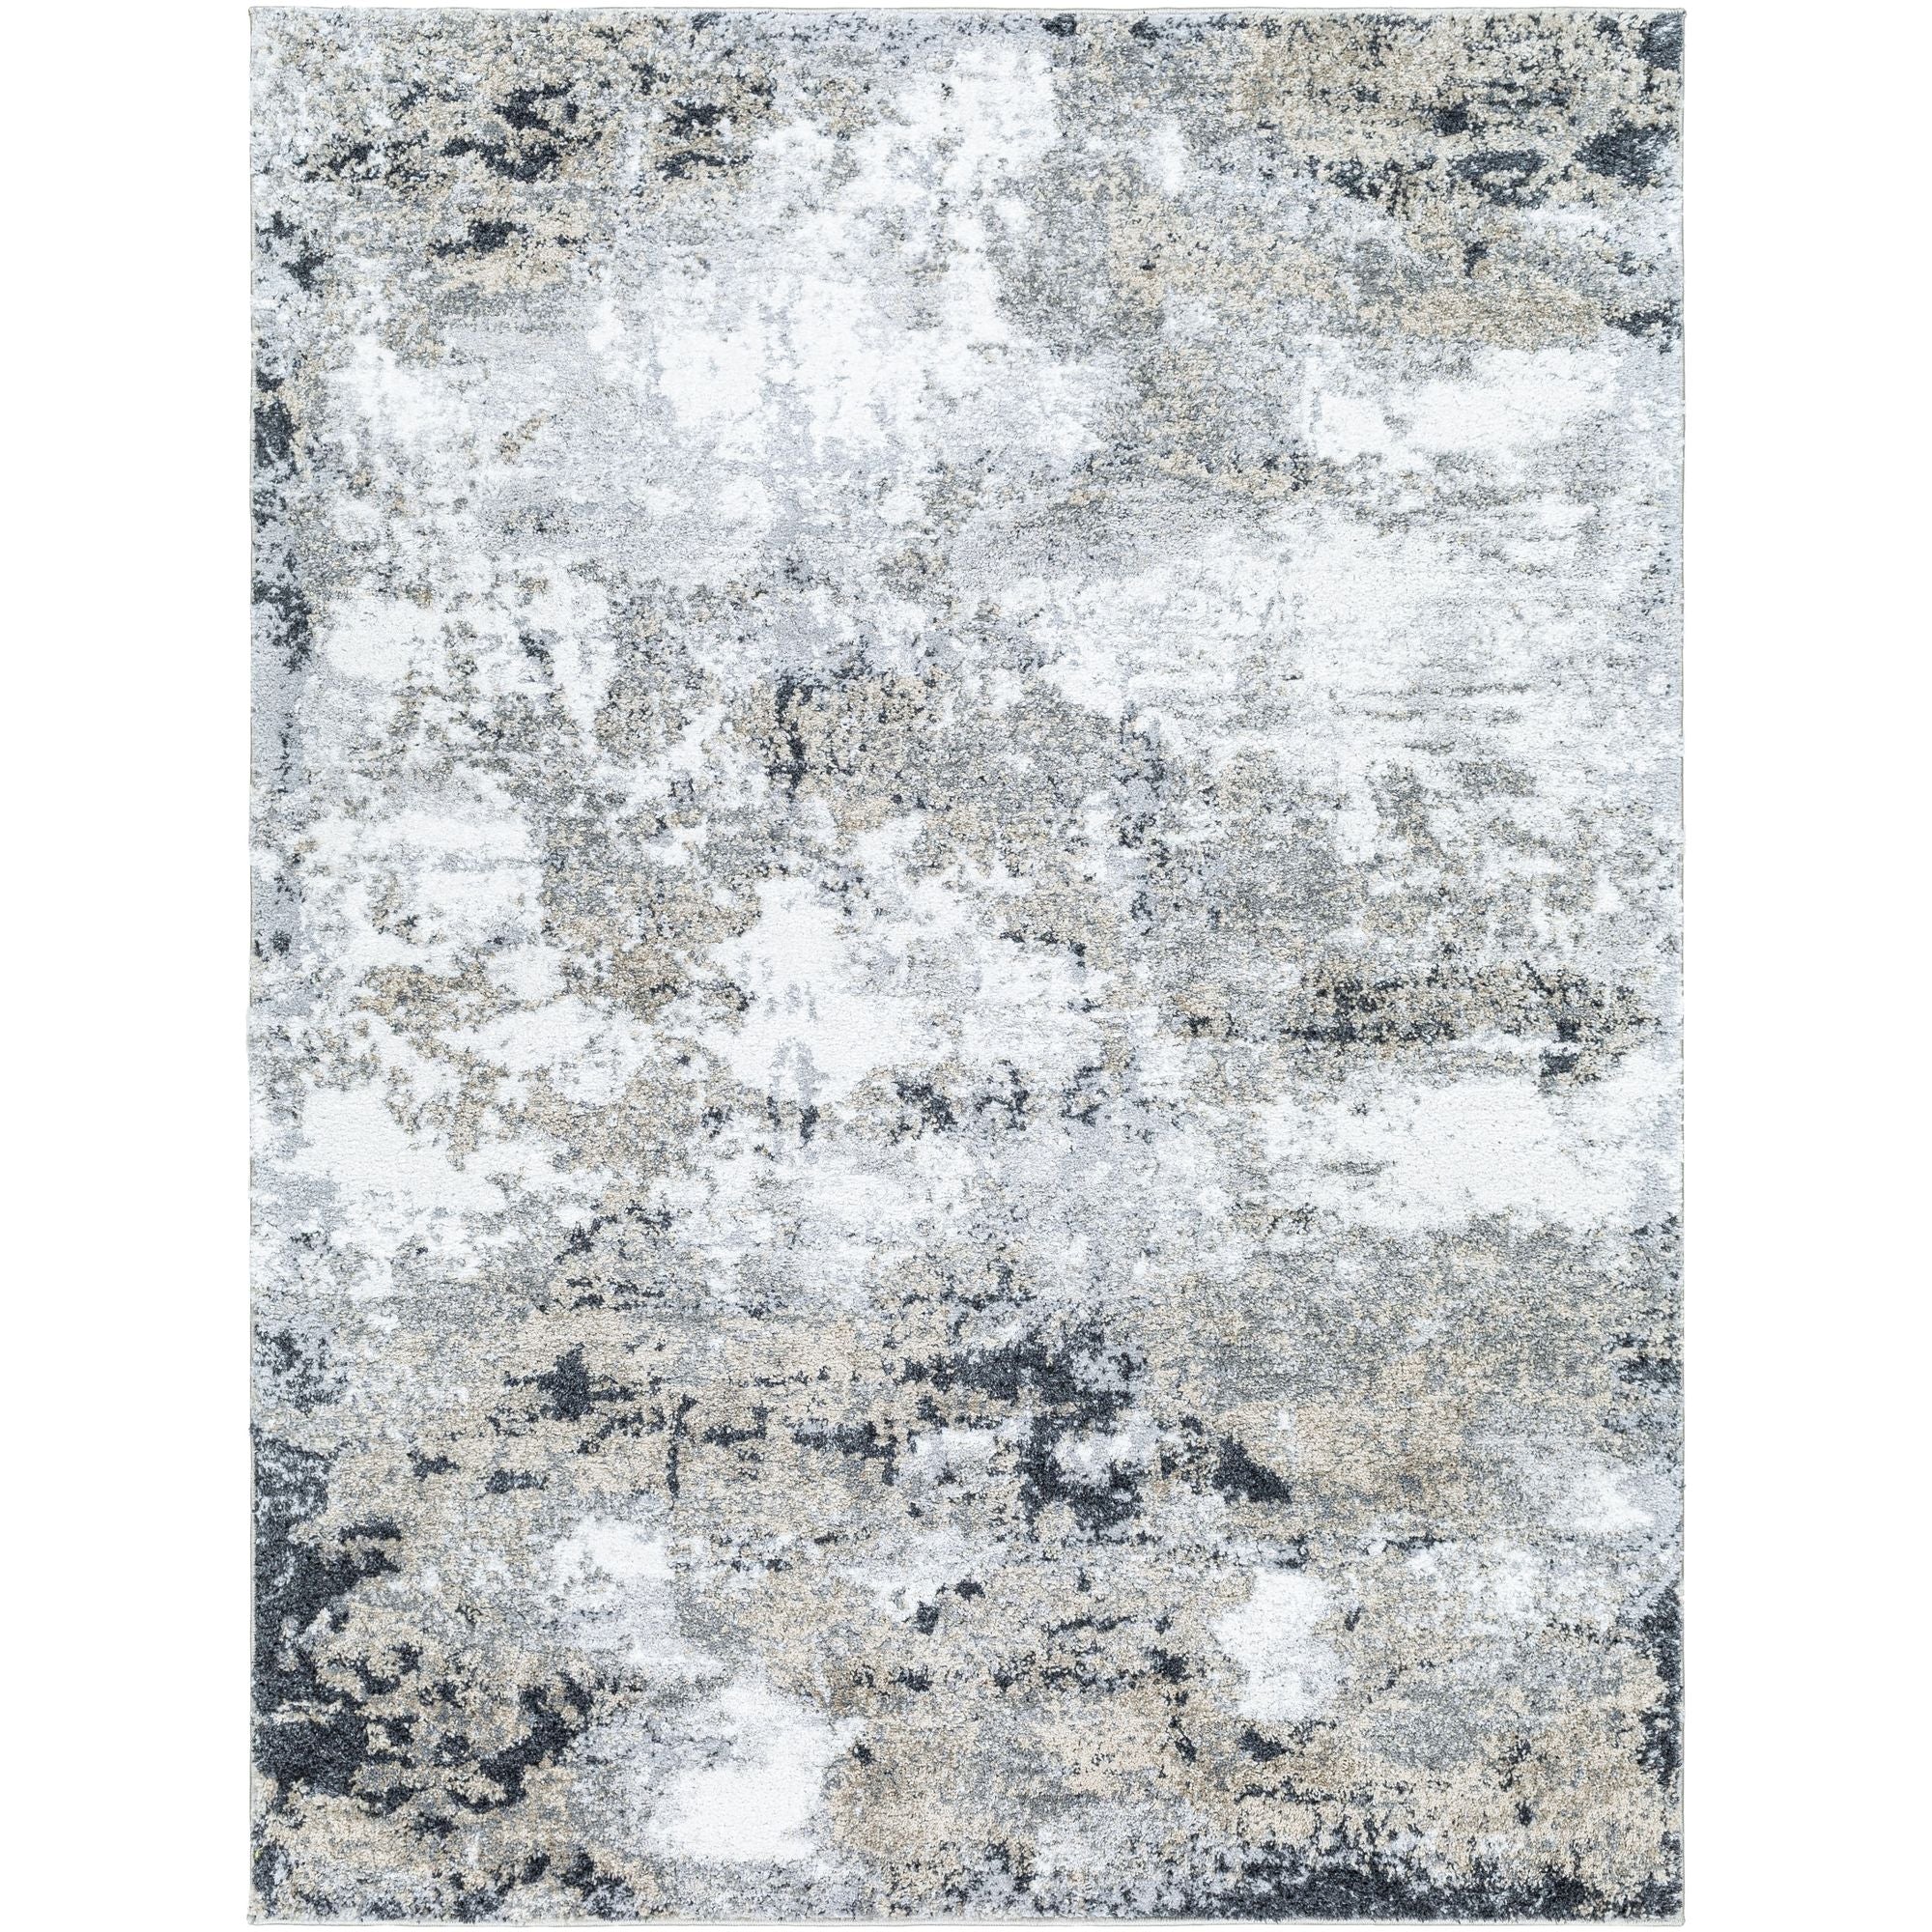 Machine Woven PTF-2321 White, Light Gray, Medium Gray, Beige, Charcoal, Taupe Rugs #color_white, light gray, medium gray, beige, charcoal, taupe